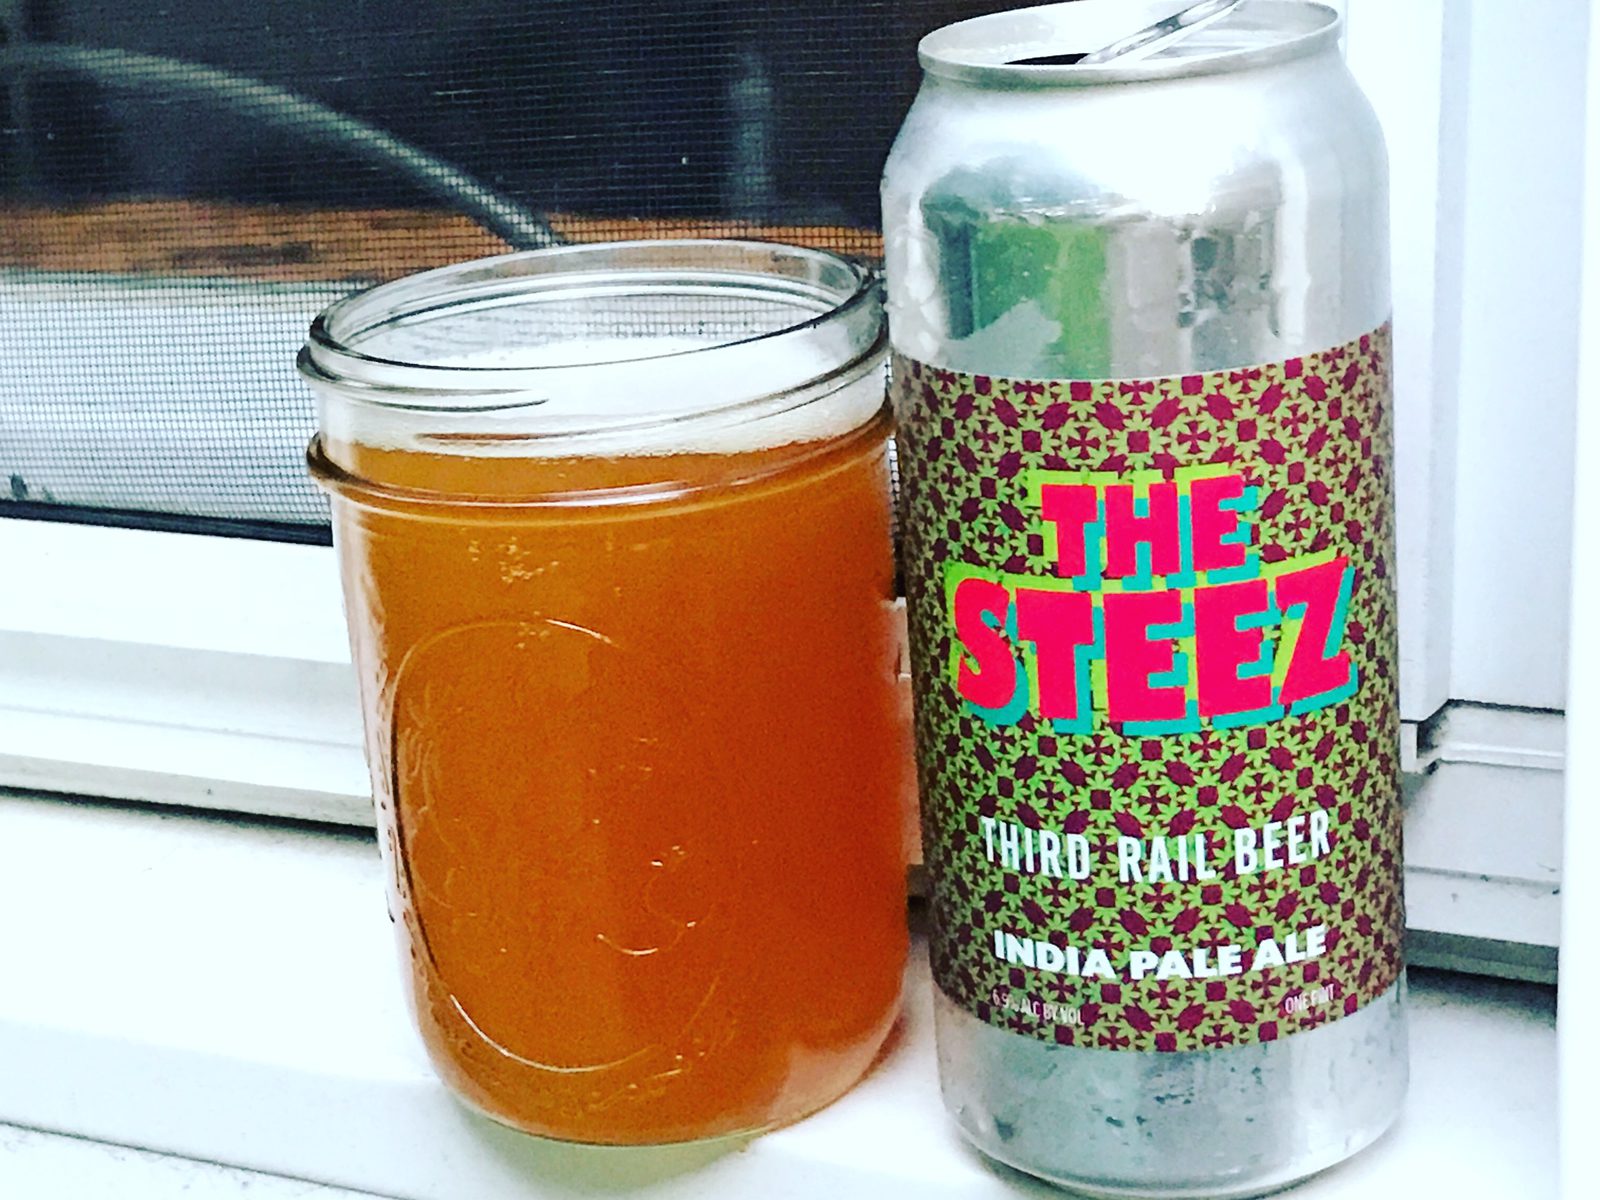 Third Rail Beer: The Steez